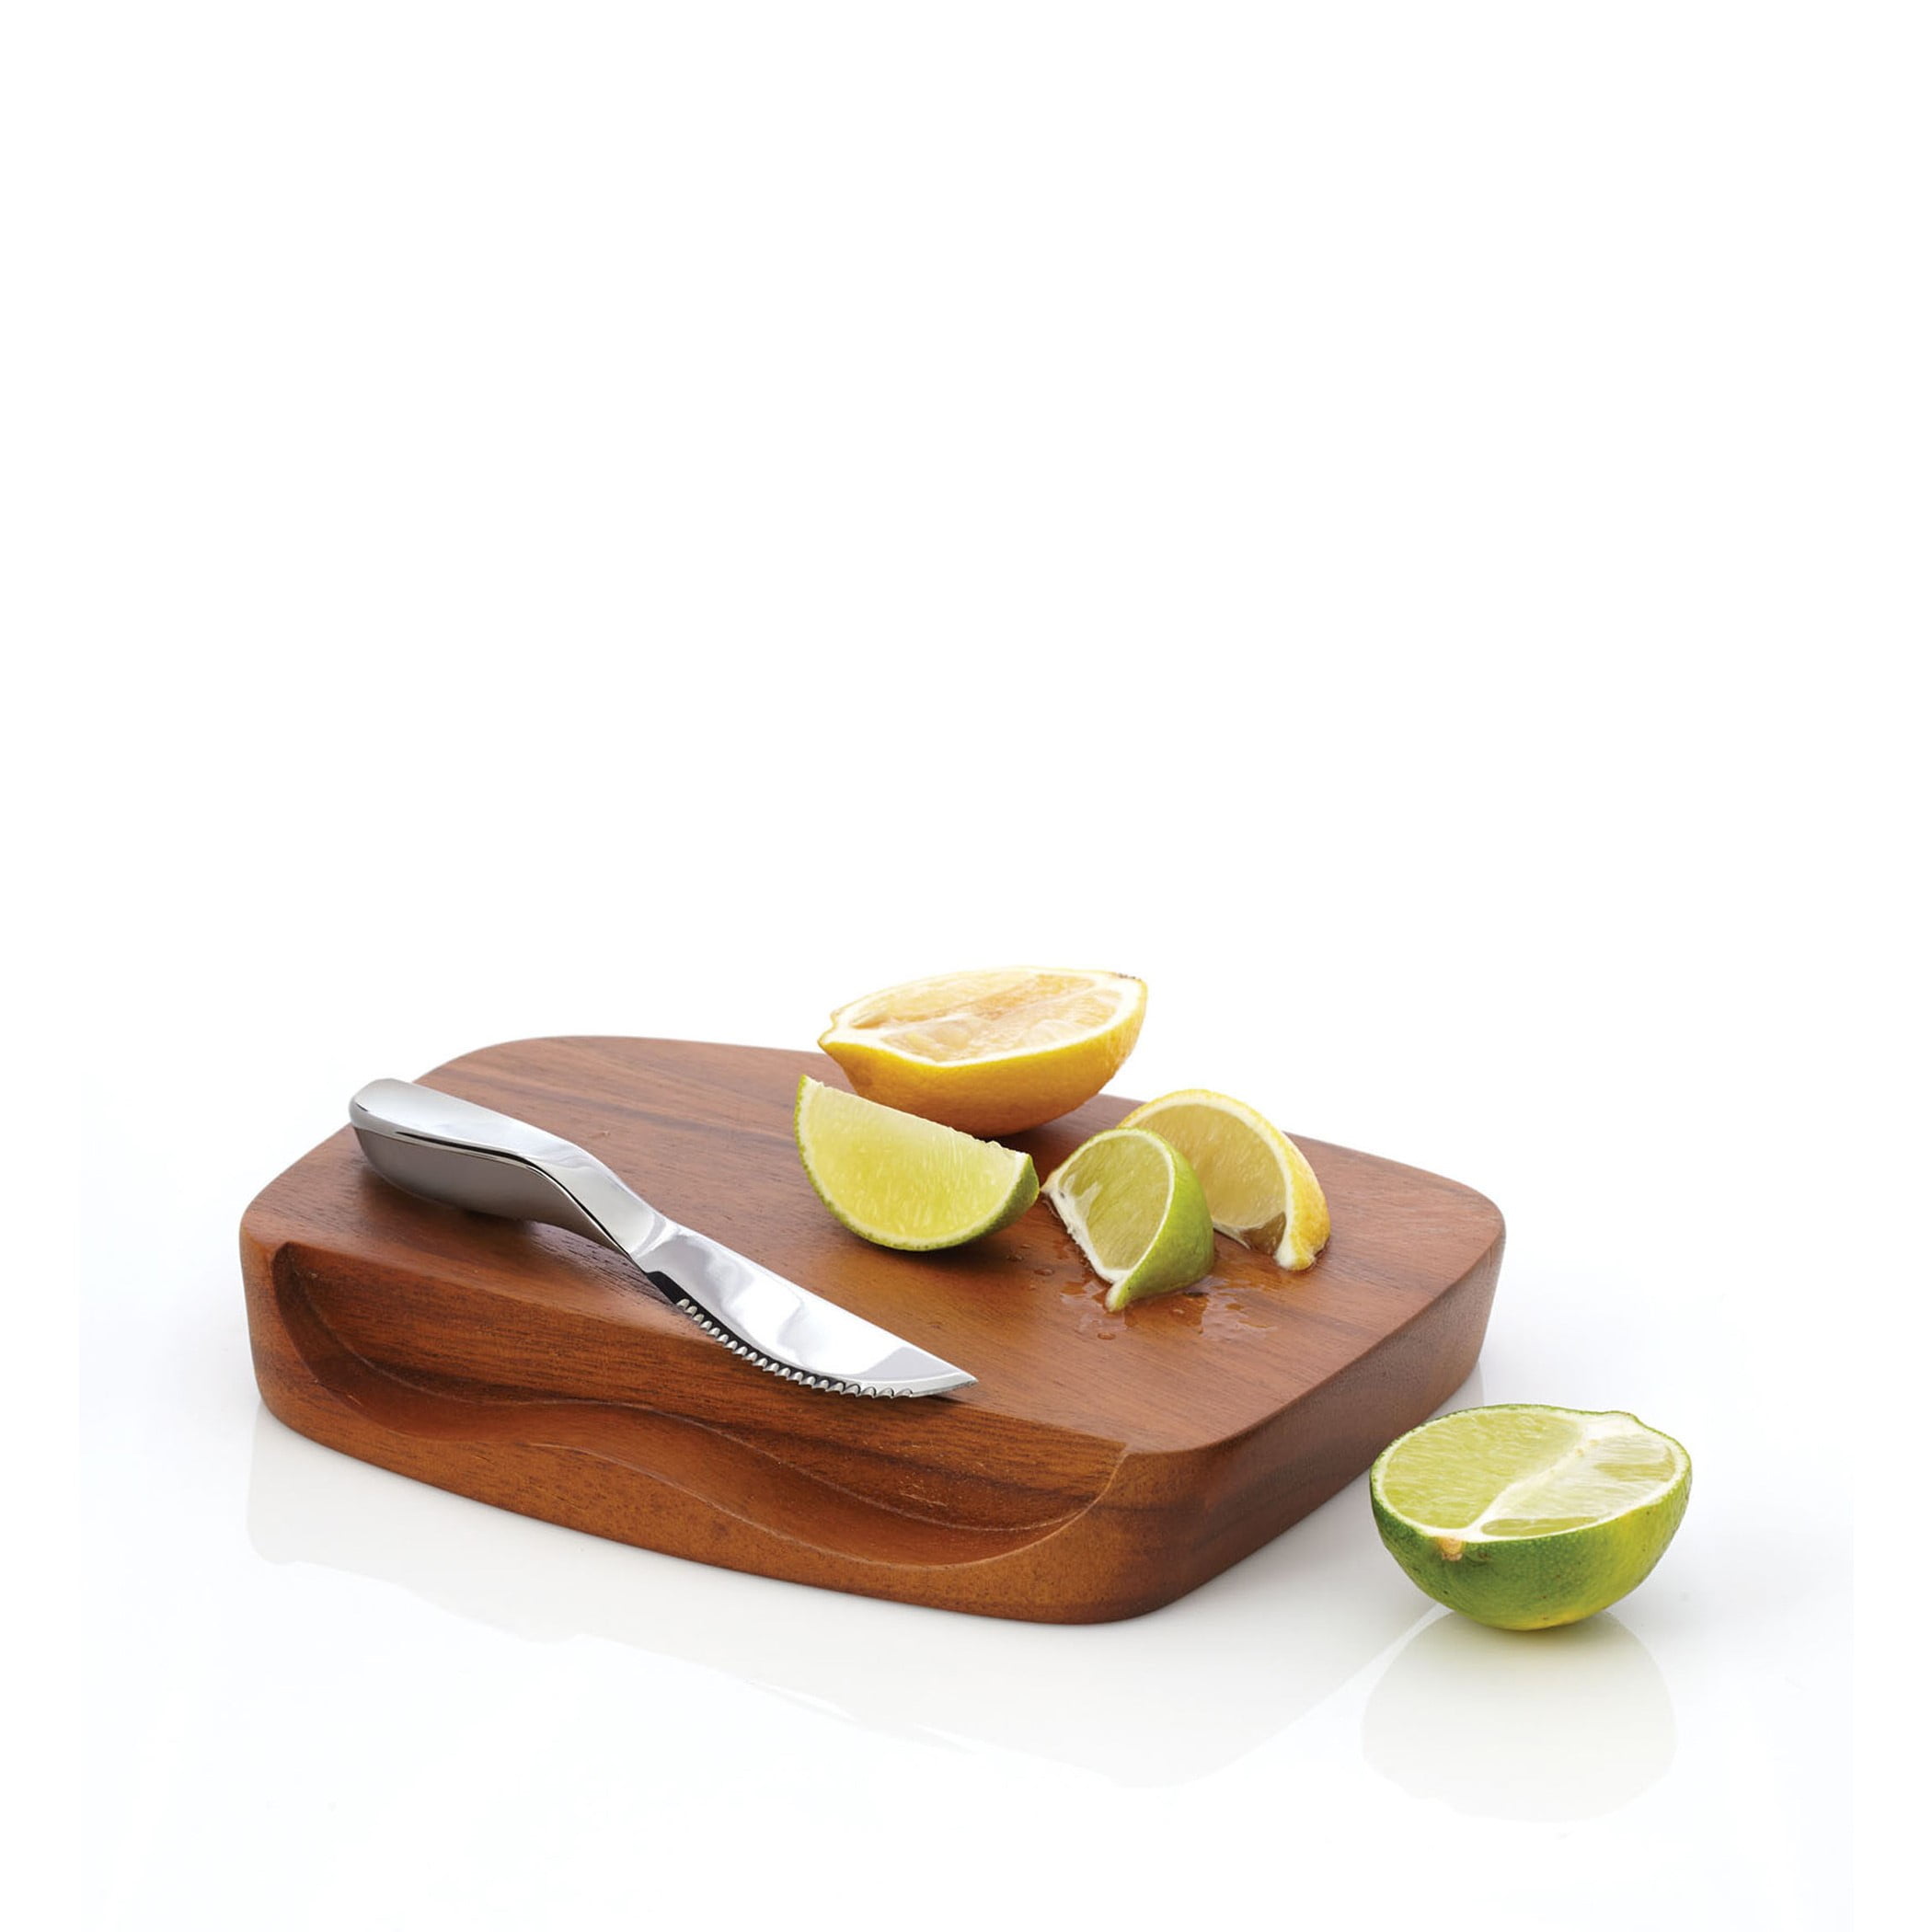 Hob Covers with Knobs Set of 2 Chopping Board Lemon Citrus Fruits